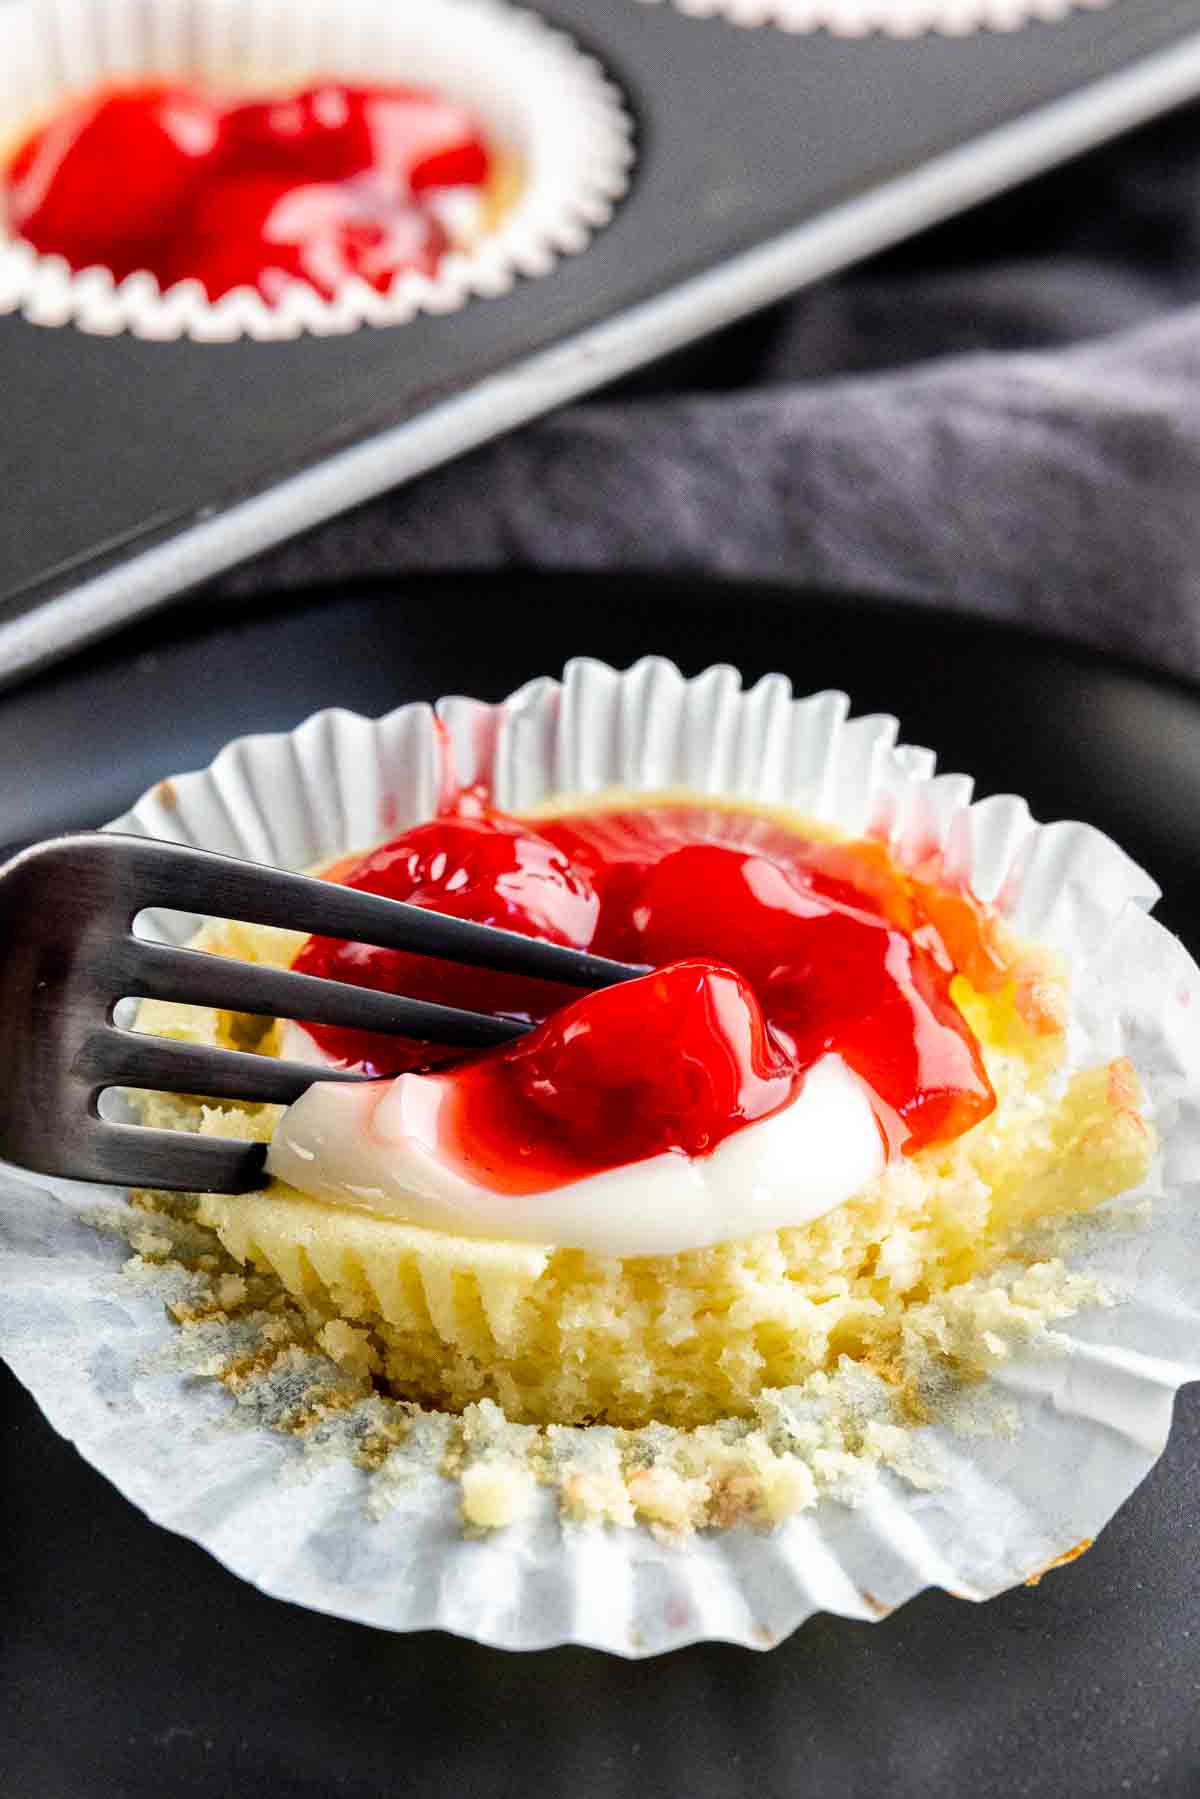 A fork is being used to eat a mini cheesecake